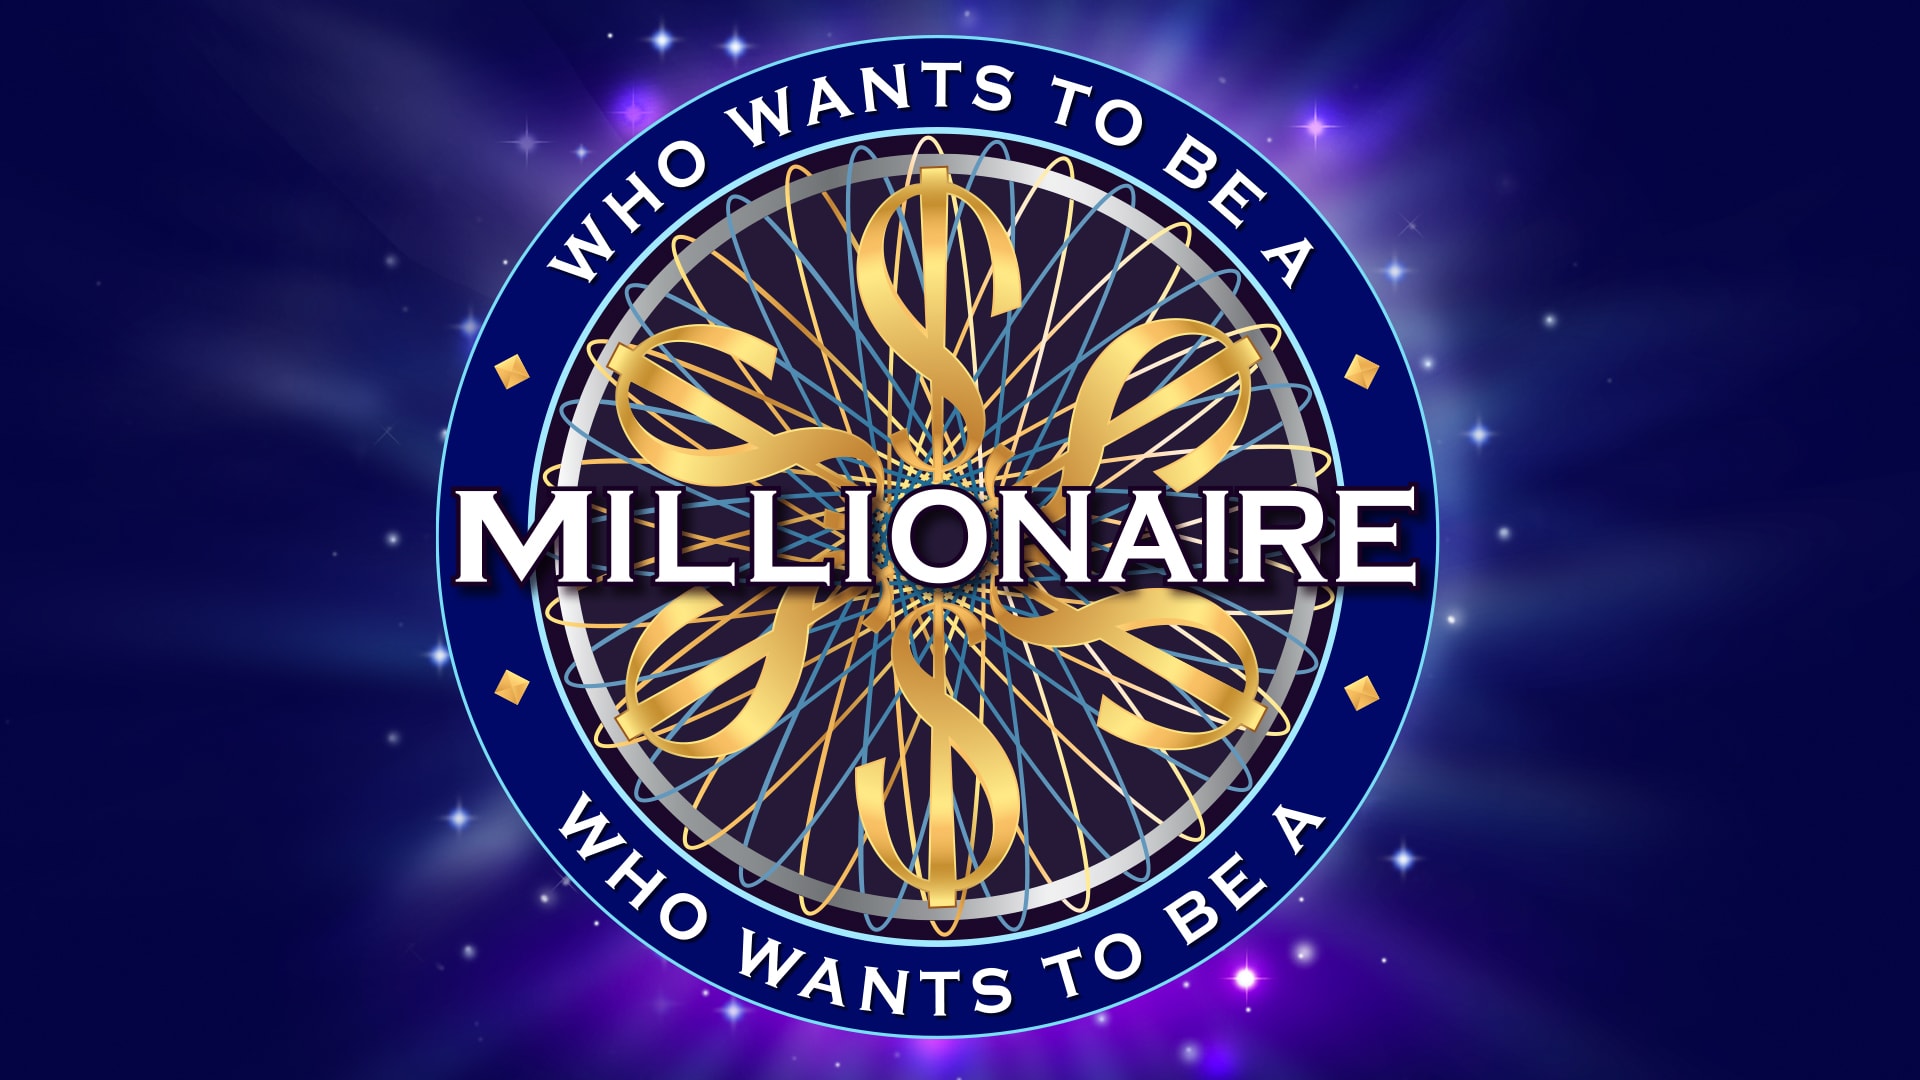 Who Wants to Be a Millionaire? 1